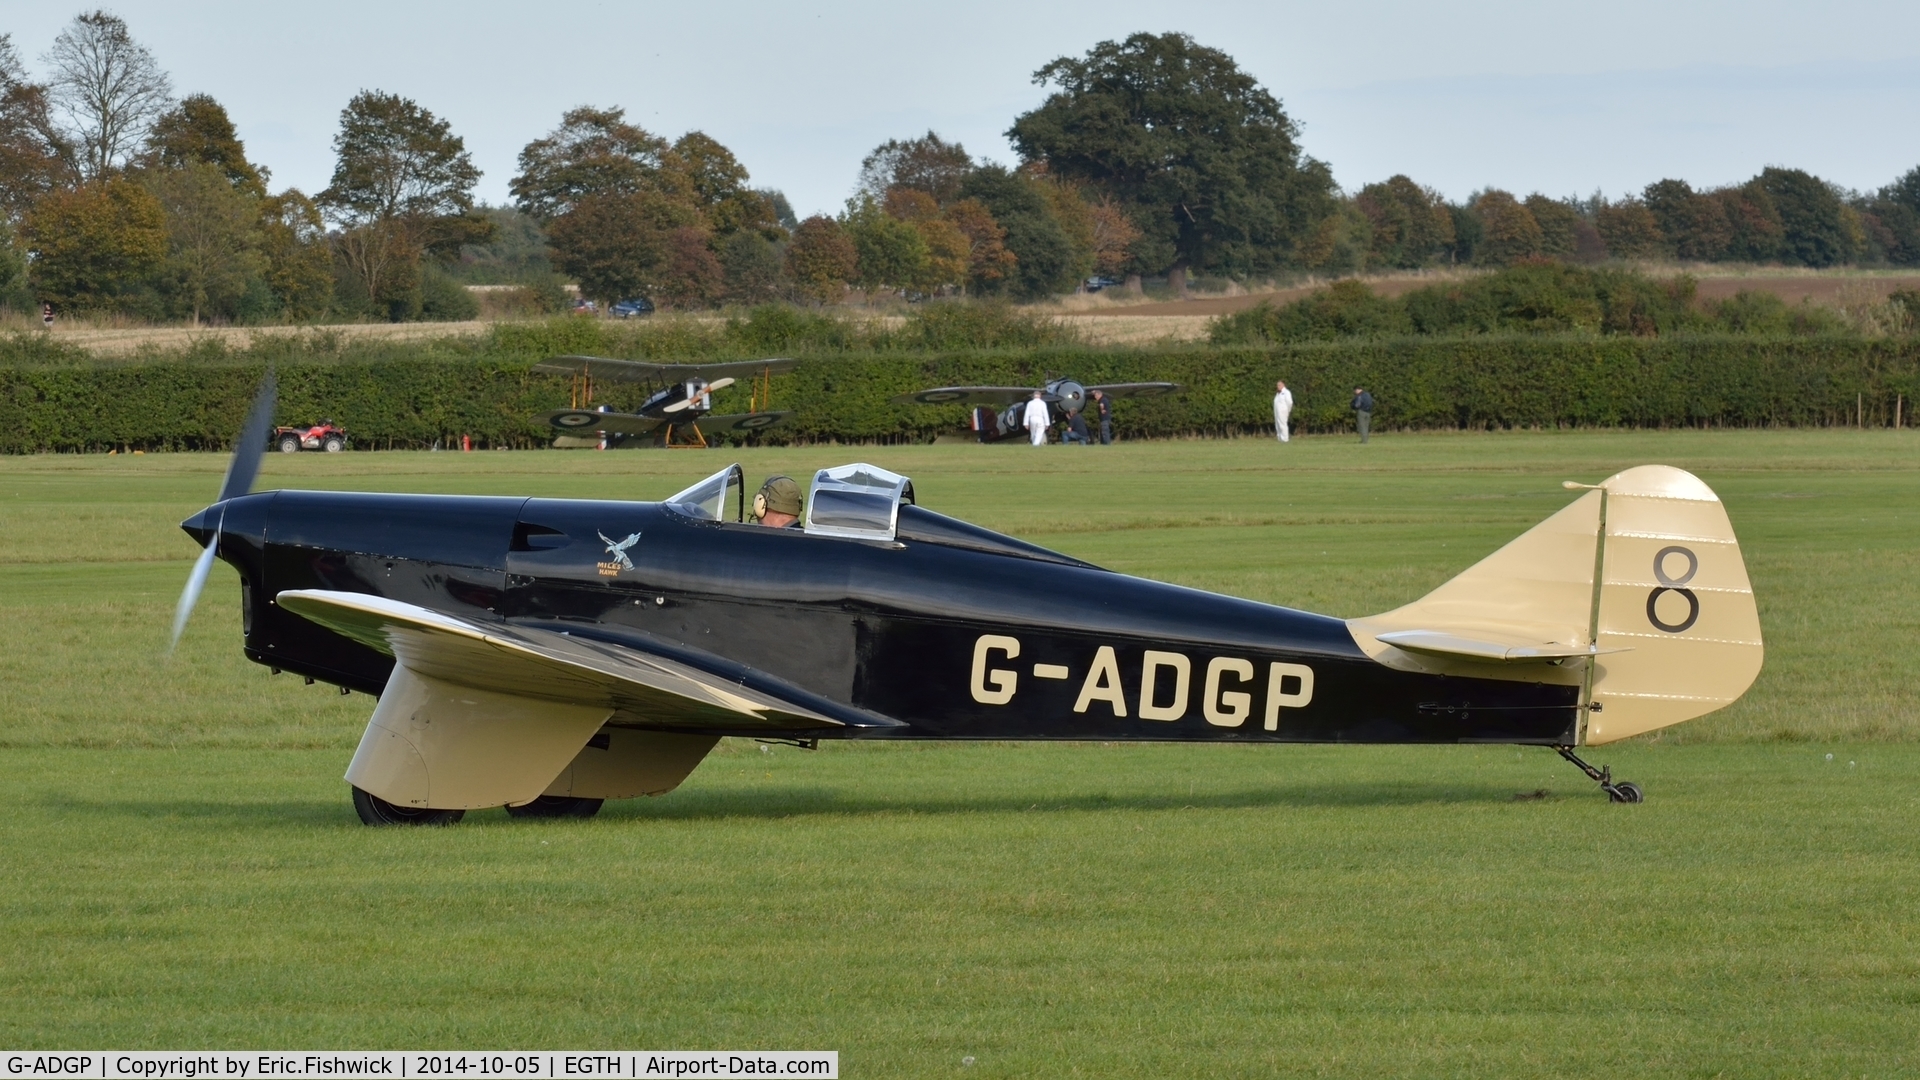 G-ADGP, 1935 Miles M.2L Hawk Speed Six C/N 160, 1. G-ADGP at the rousing season finale Race Day Air Show at Shuttleworth, Oct. 2014.